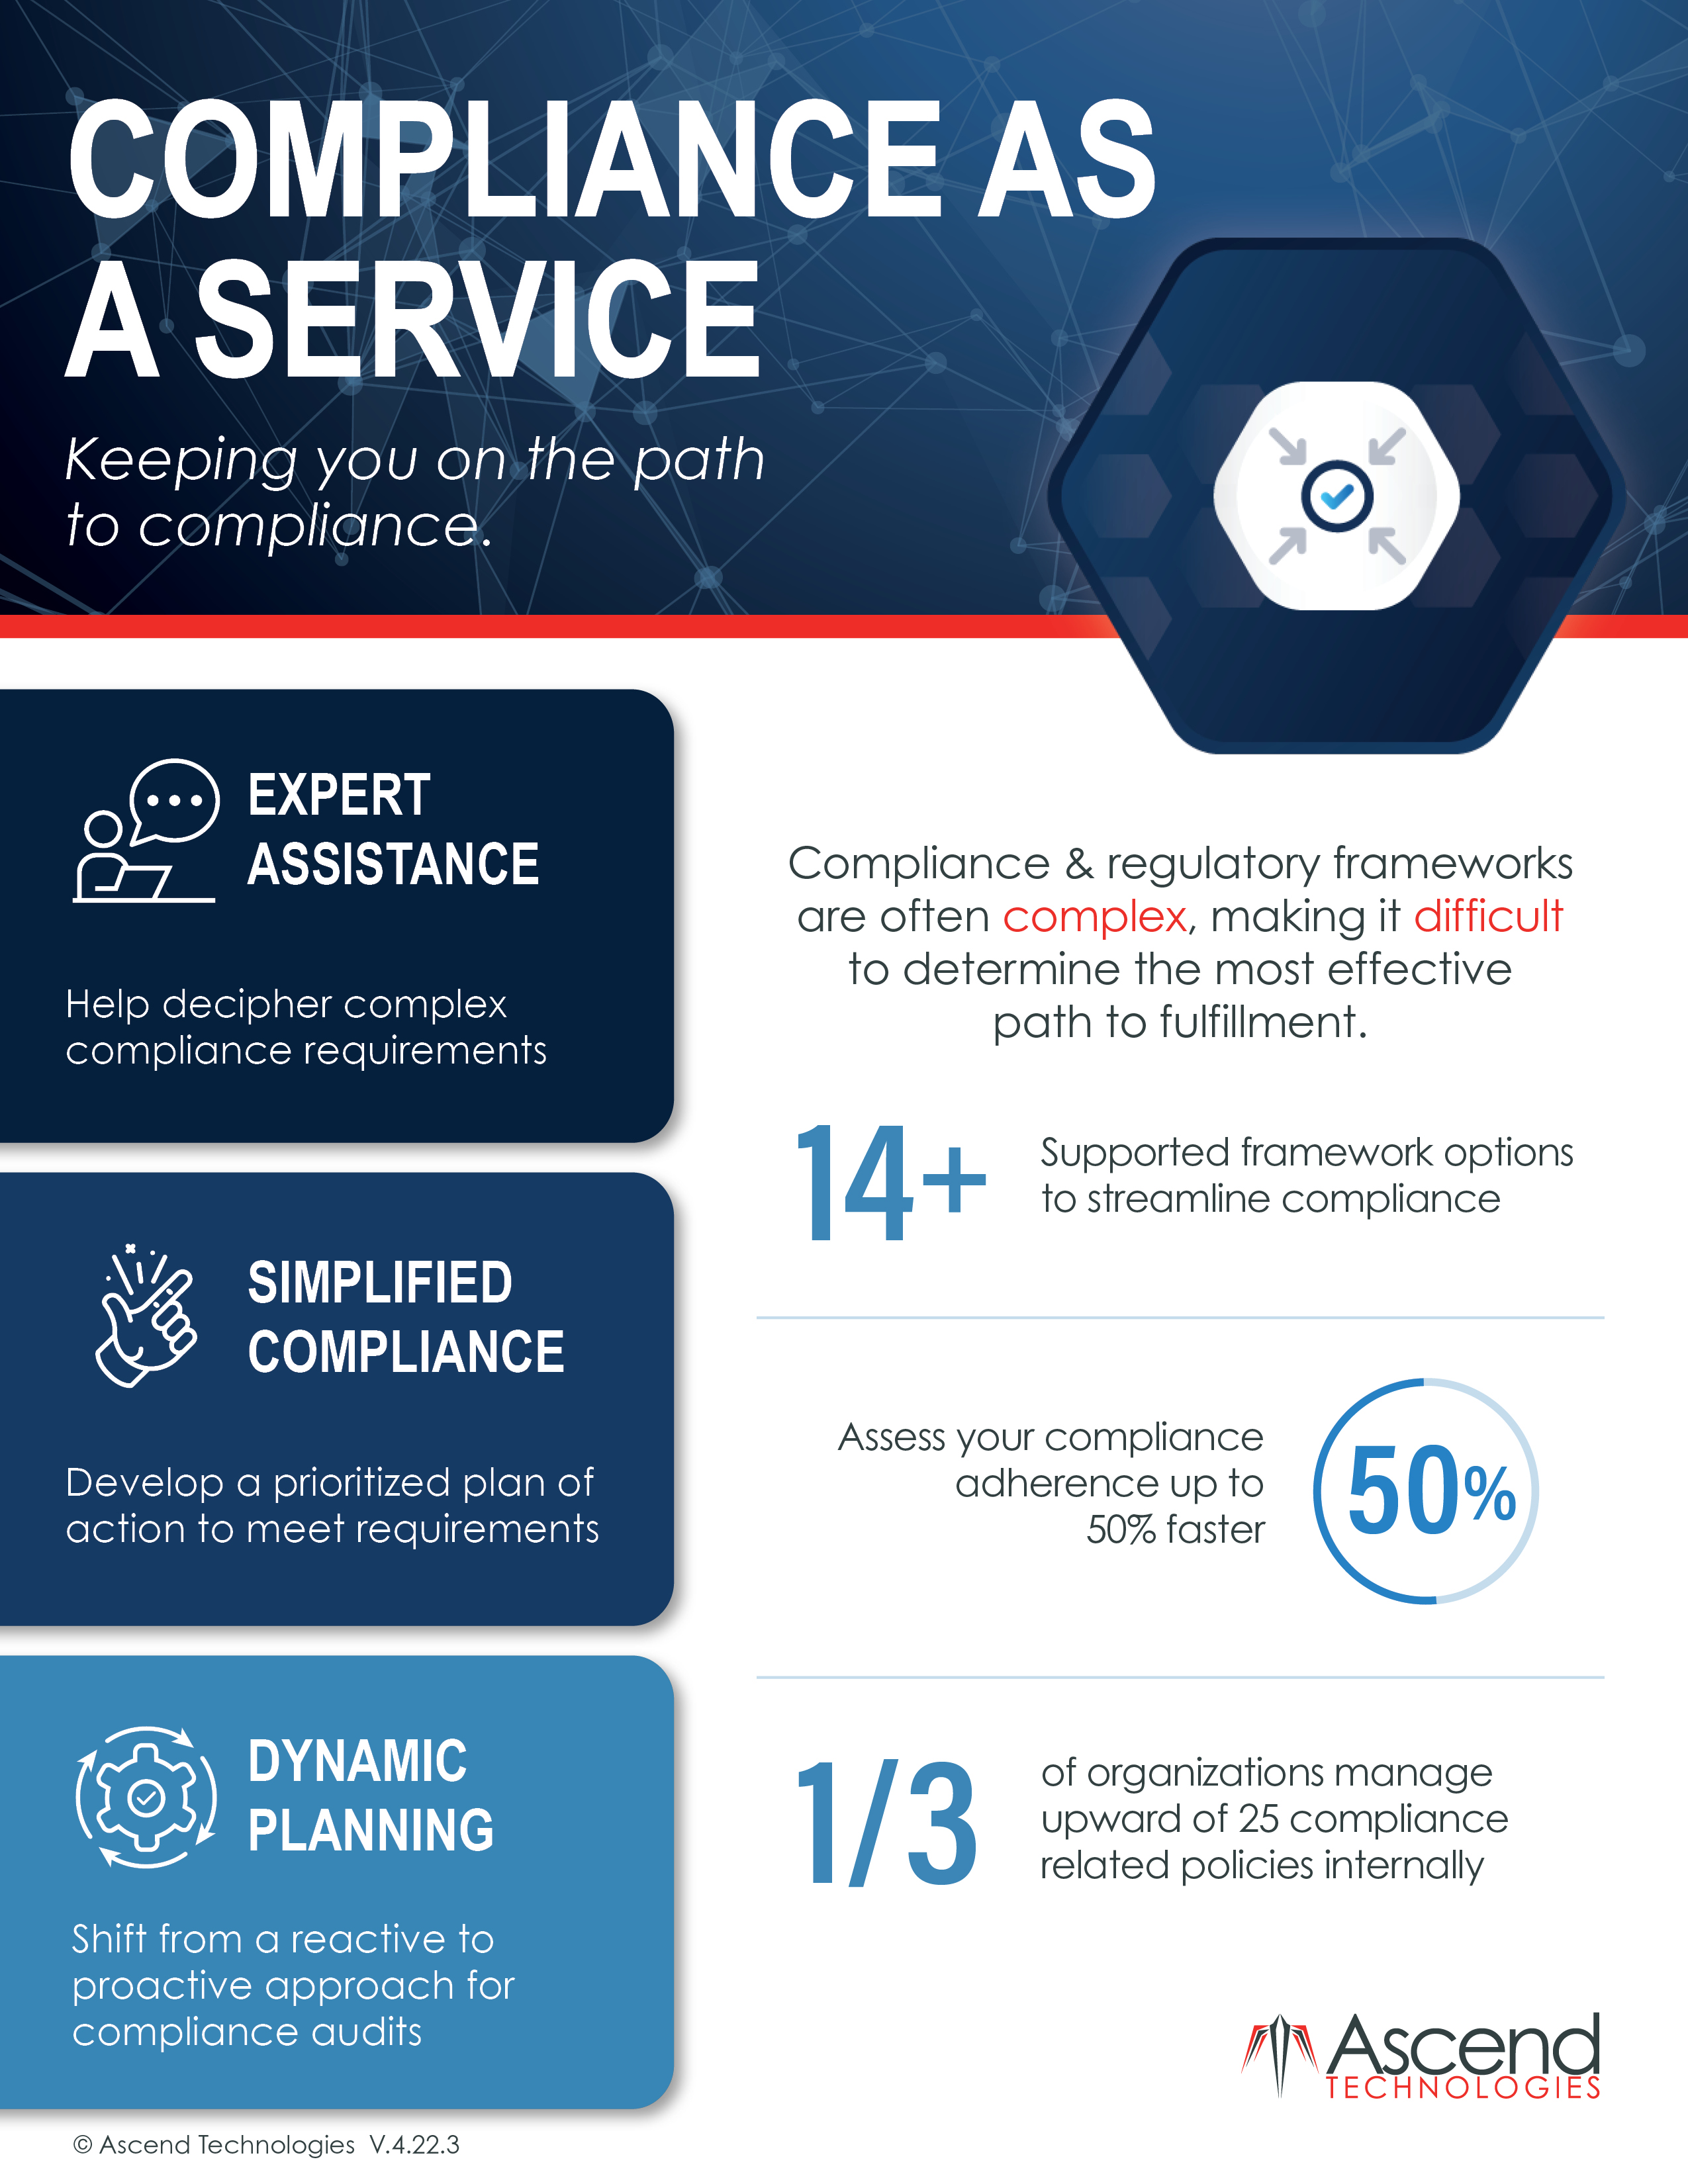 Compliance as a Service